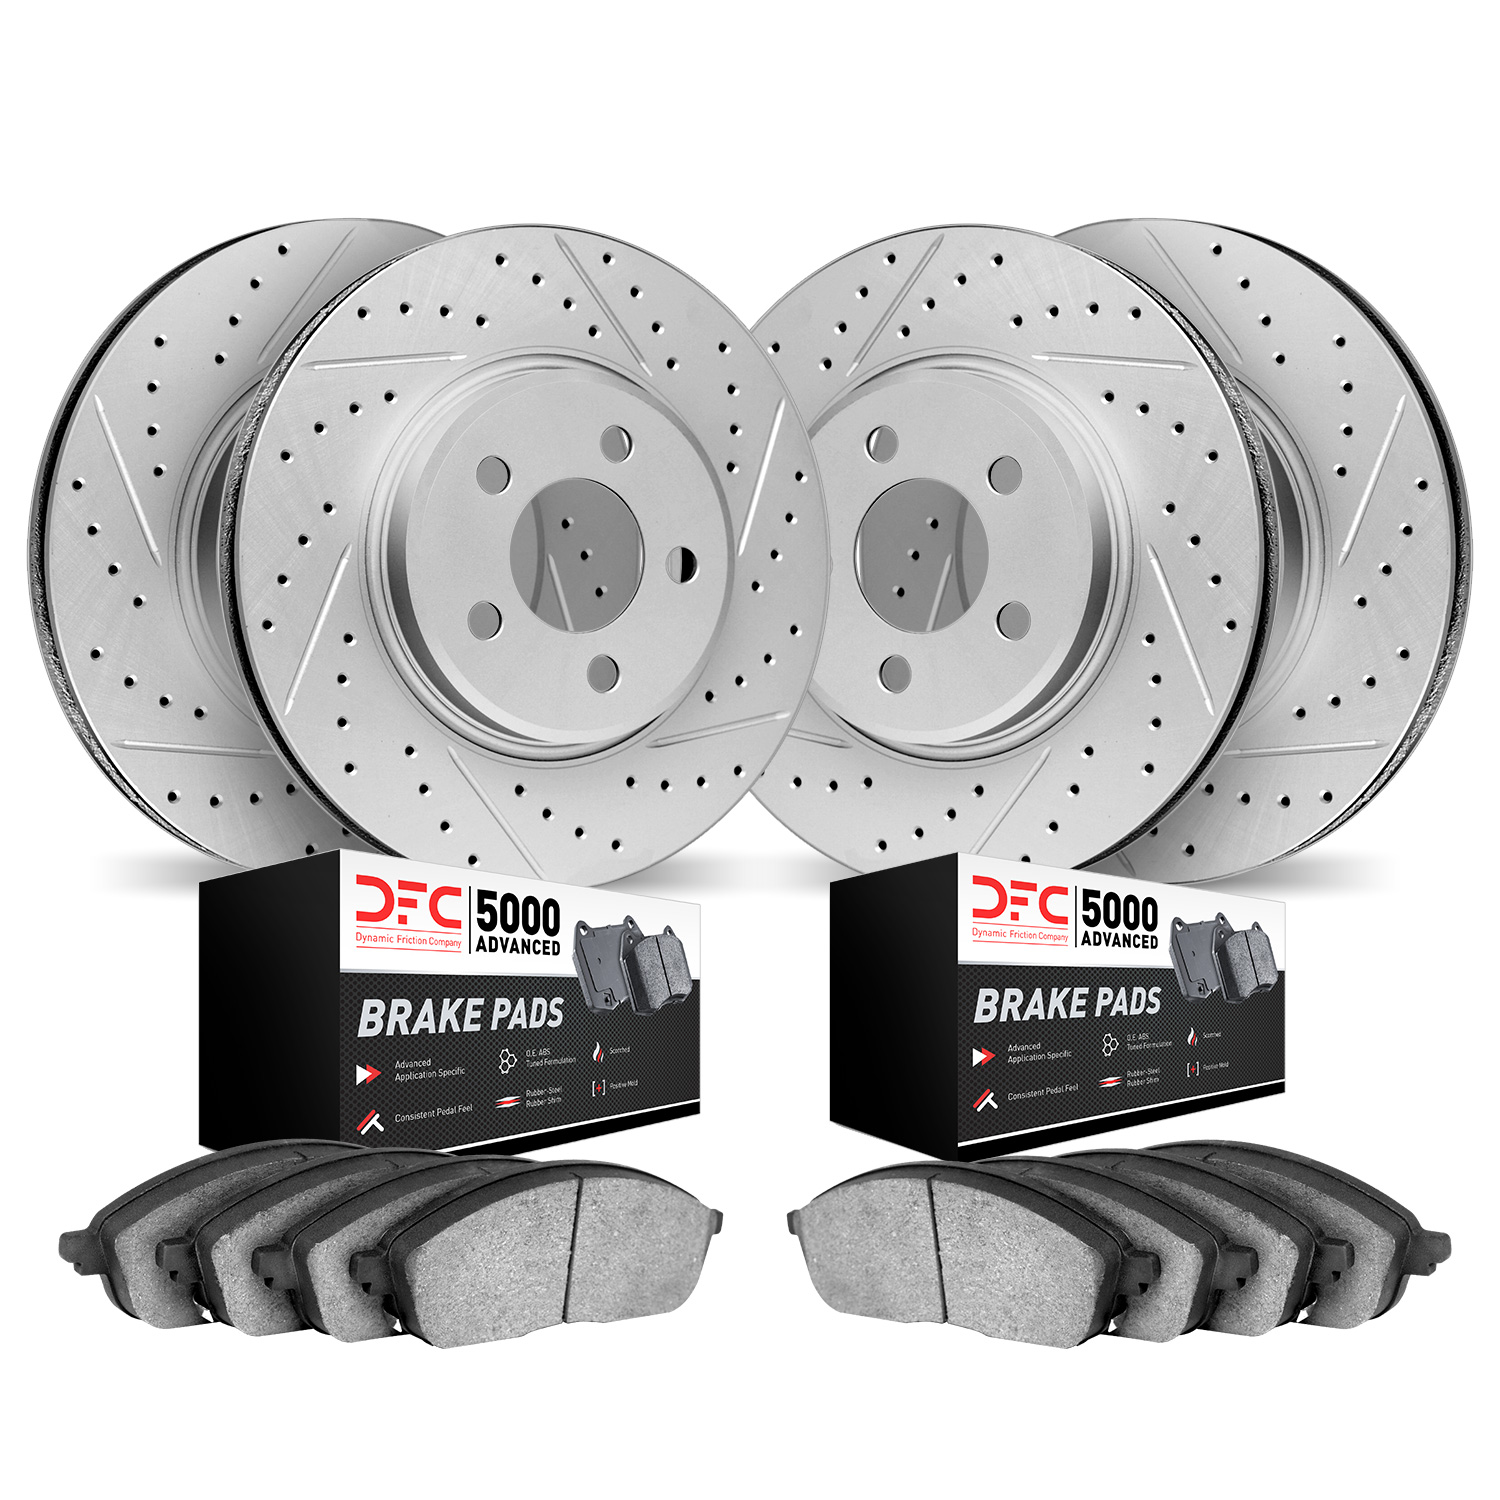 2504-75002 Geoperformance Drilled/Slotted Rotors w/5000 Advanced Brake Pads Kit, 1995-2000 Lexus/Toyota/Scion, Position: Front a